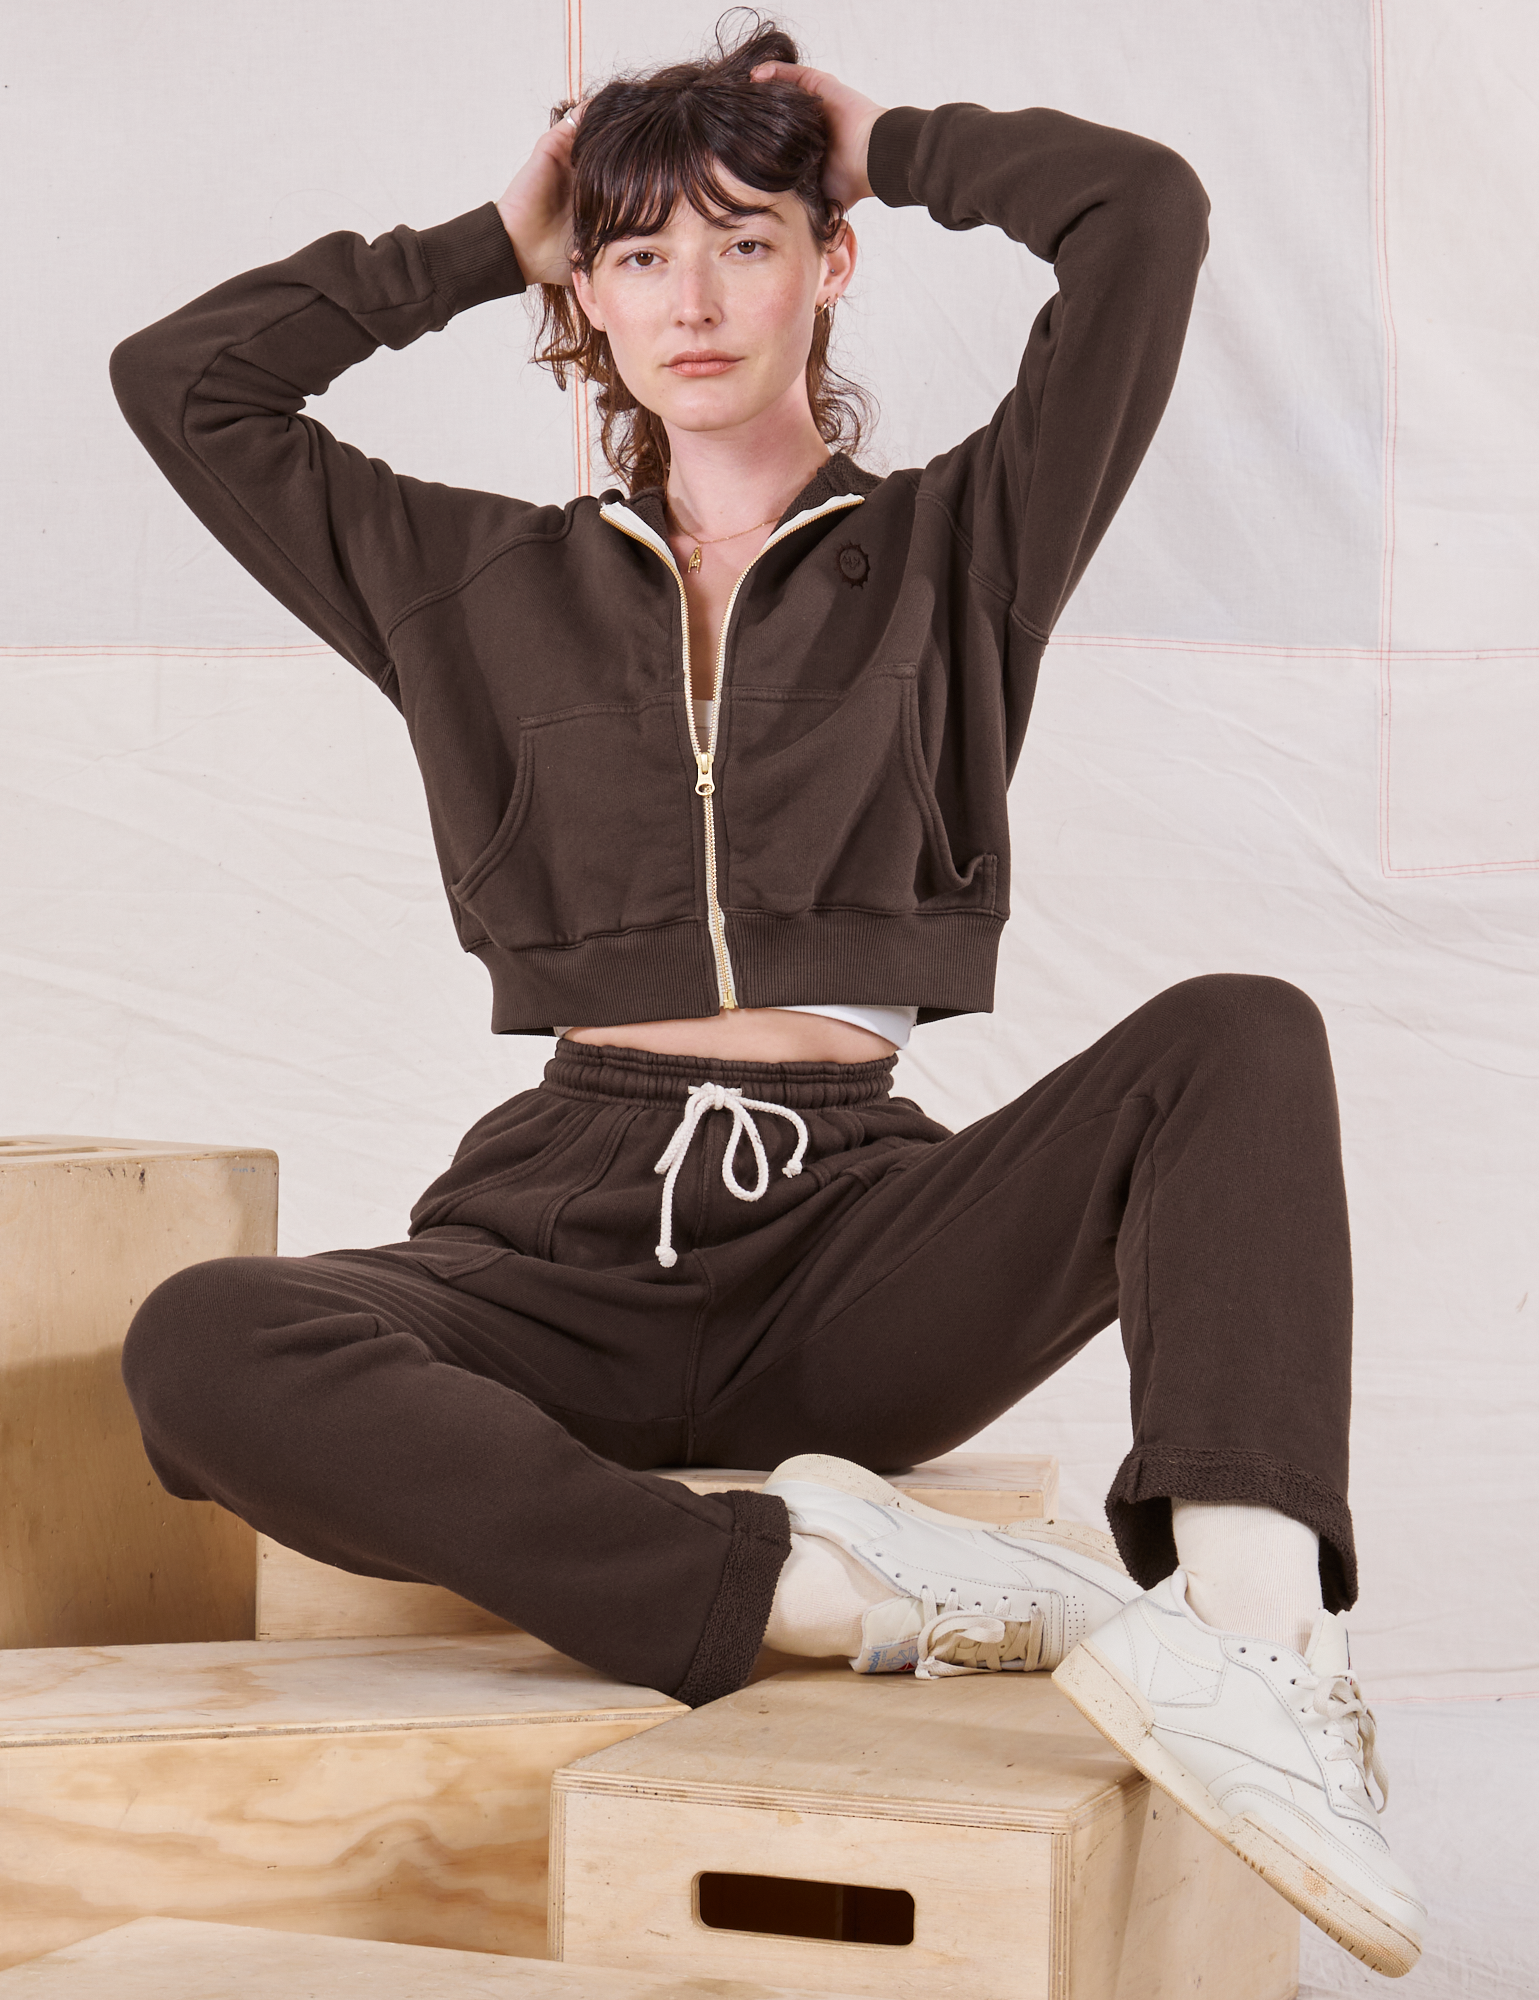 Alex is wearing Rolled Cuff Sweat Pants in Espresso Brown and matching Cropped Zip Hoodie